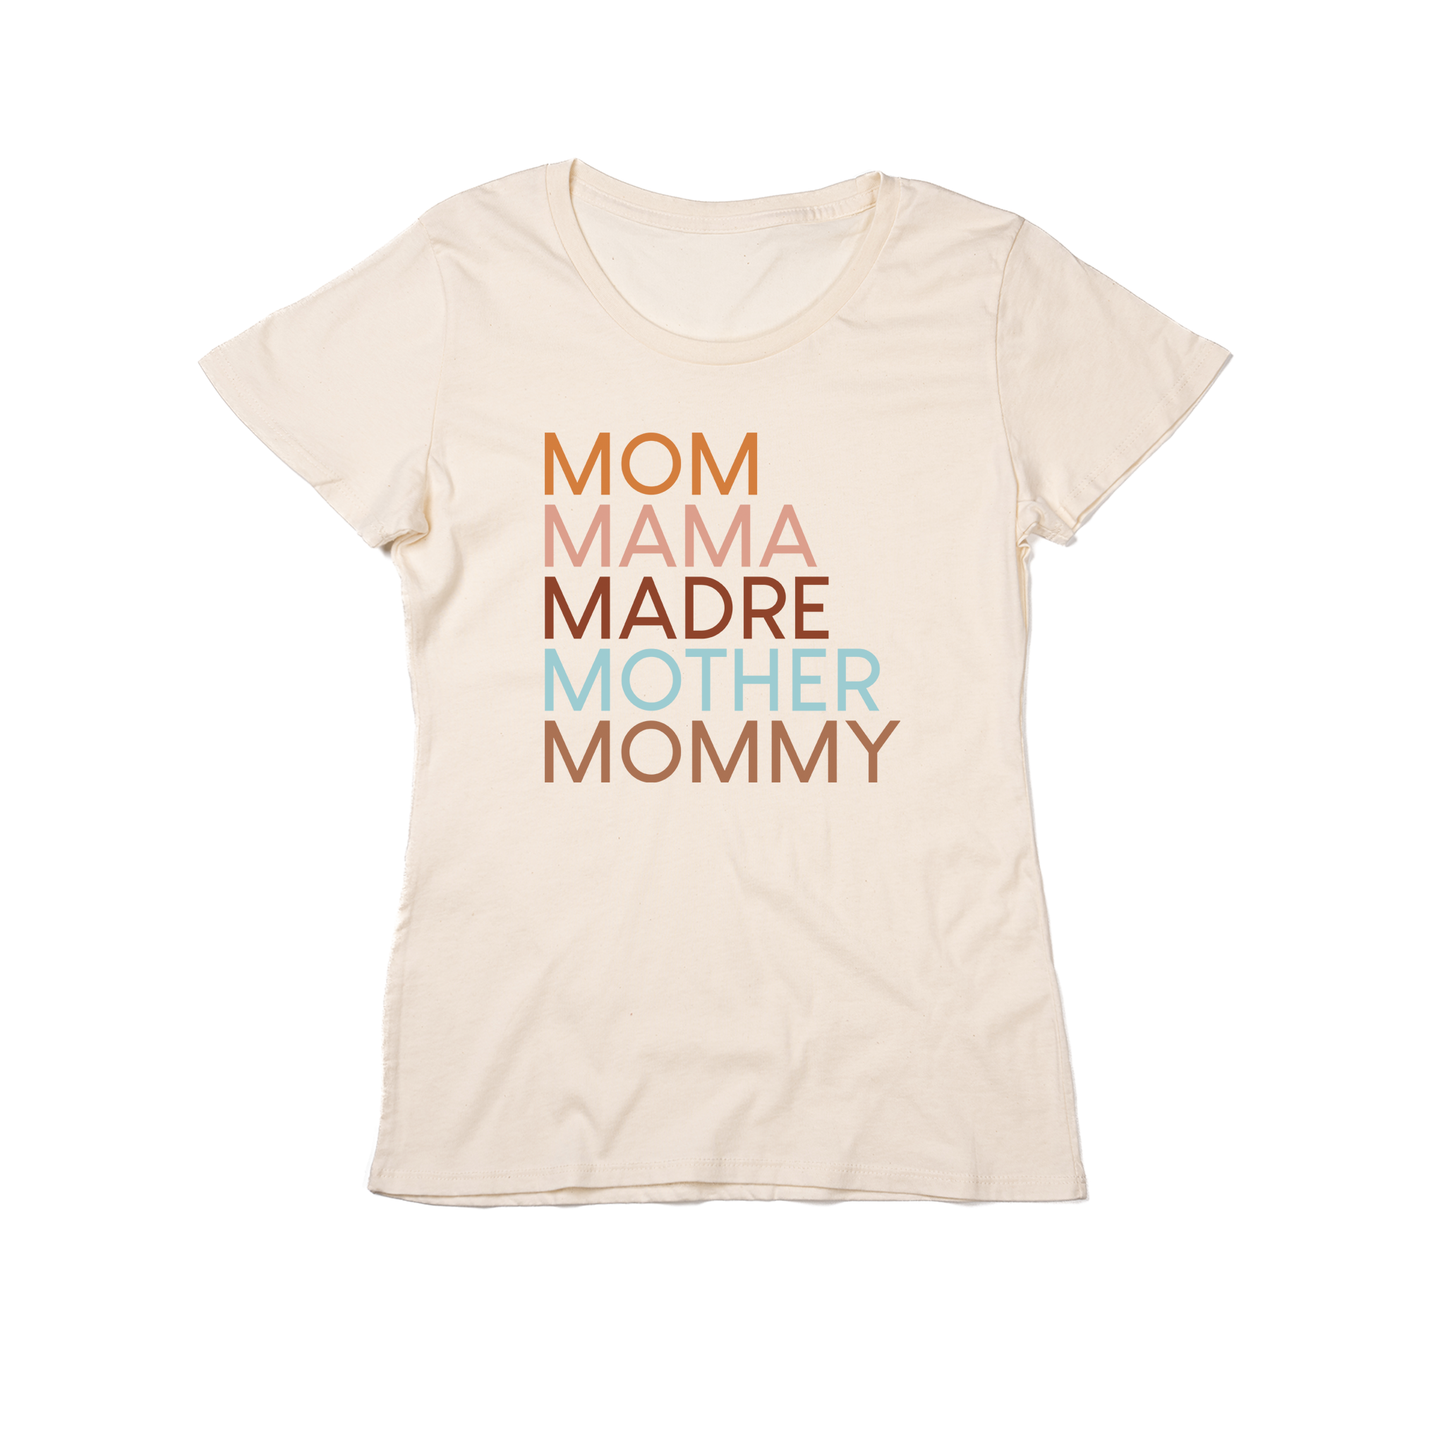 Mom Mama Madre Mother Mommy (Across Front) - Women's Fitted Tee (Natural)